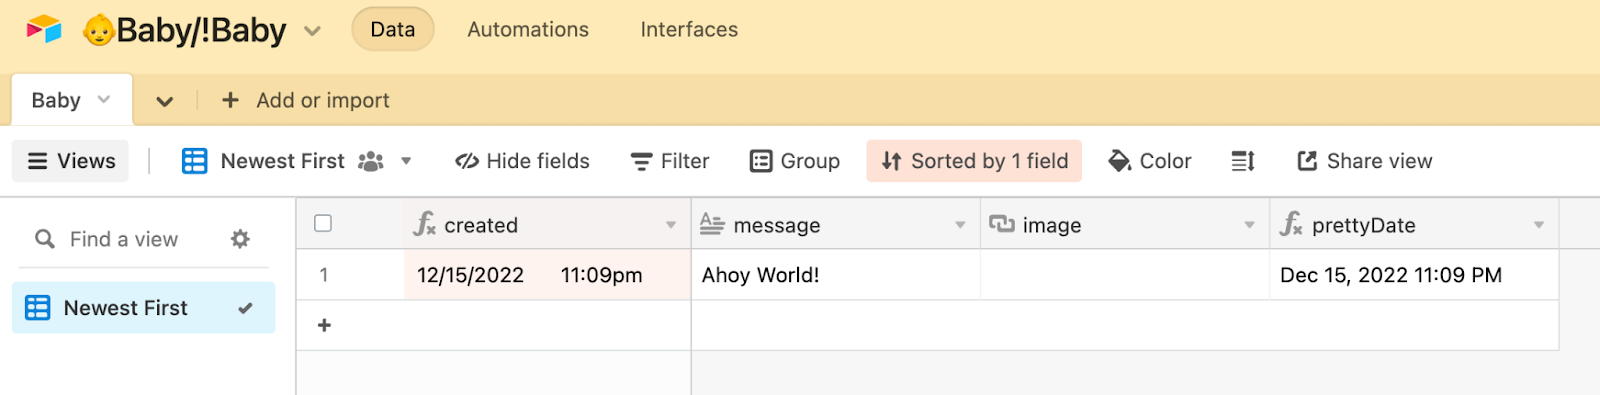 Airtable interface with column headers